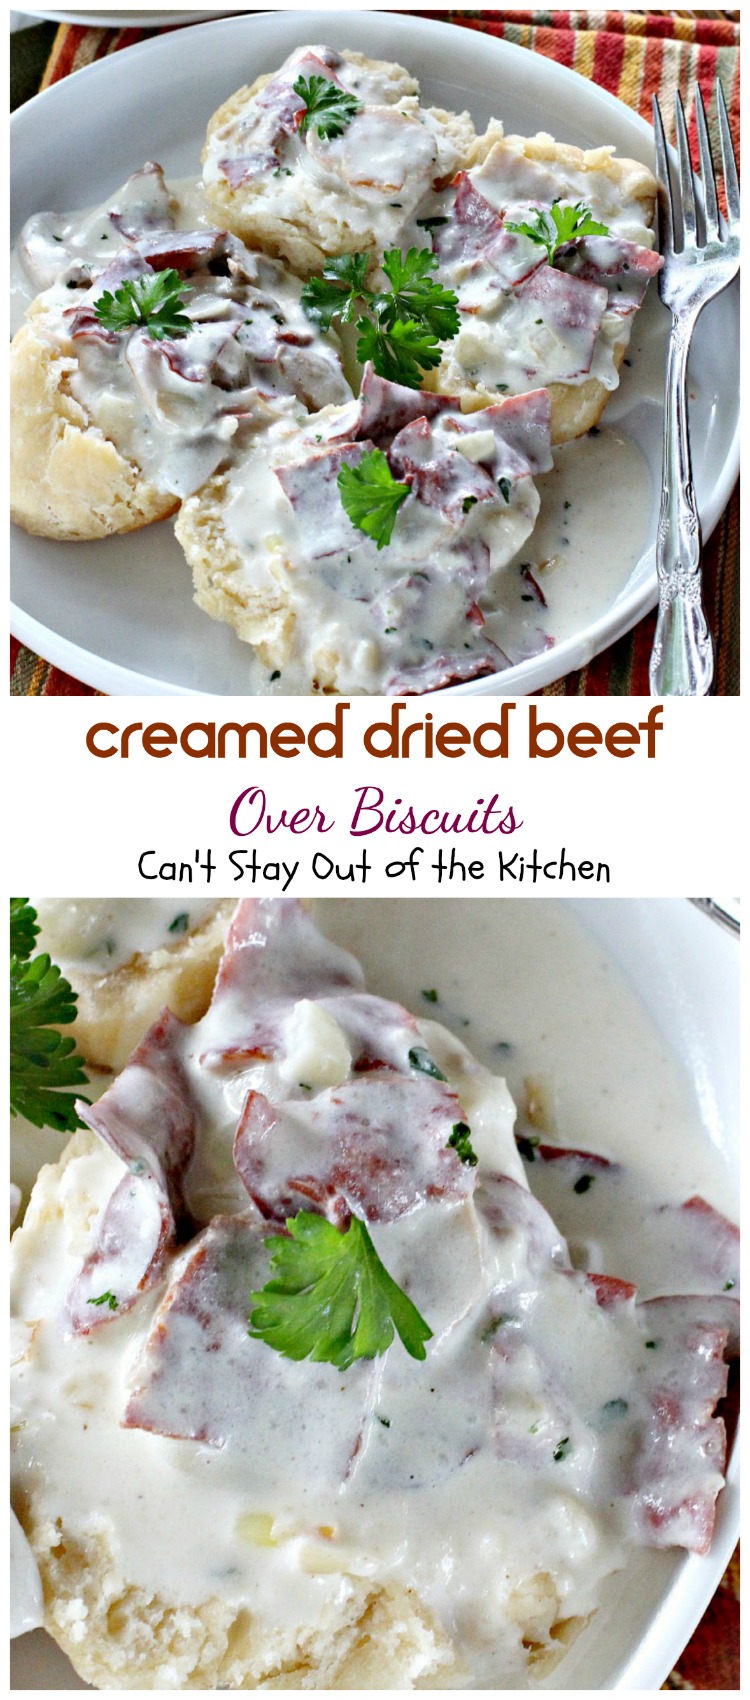 Creamed Dried Beef Over Biscuits | Can't Stay Out of the Kitchen | my favorite comfort food for #breakfast or dinner! Love this recipe over homemade #biscuits. #driedbeef 